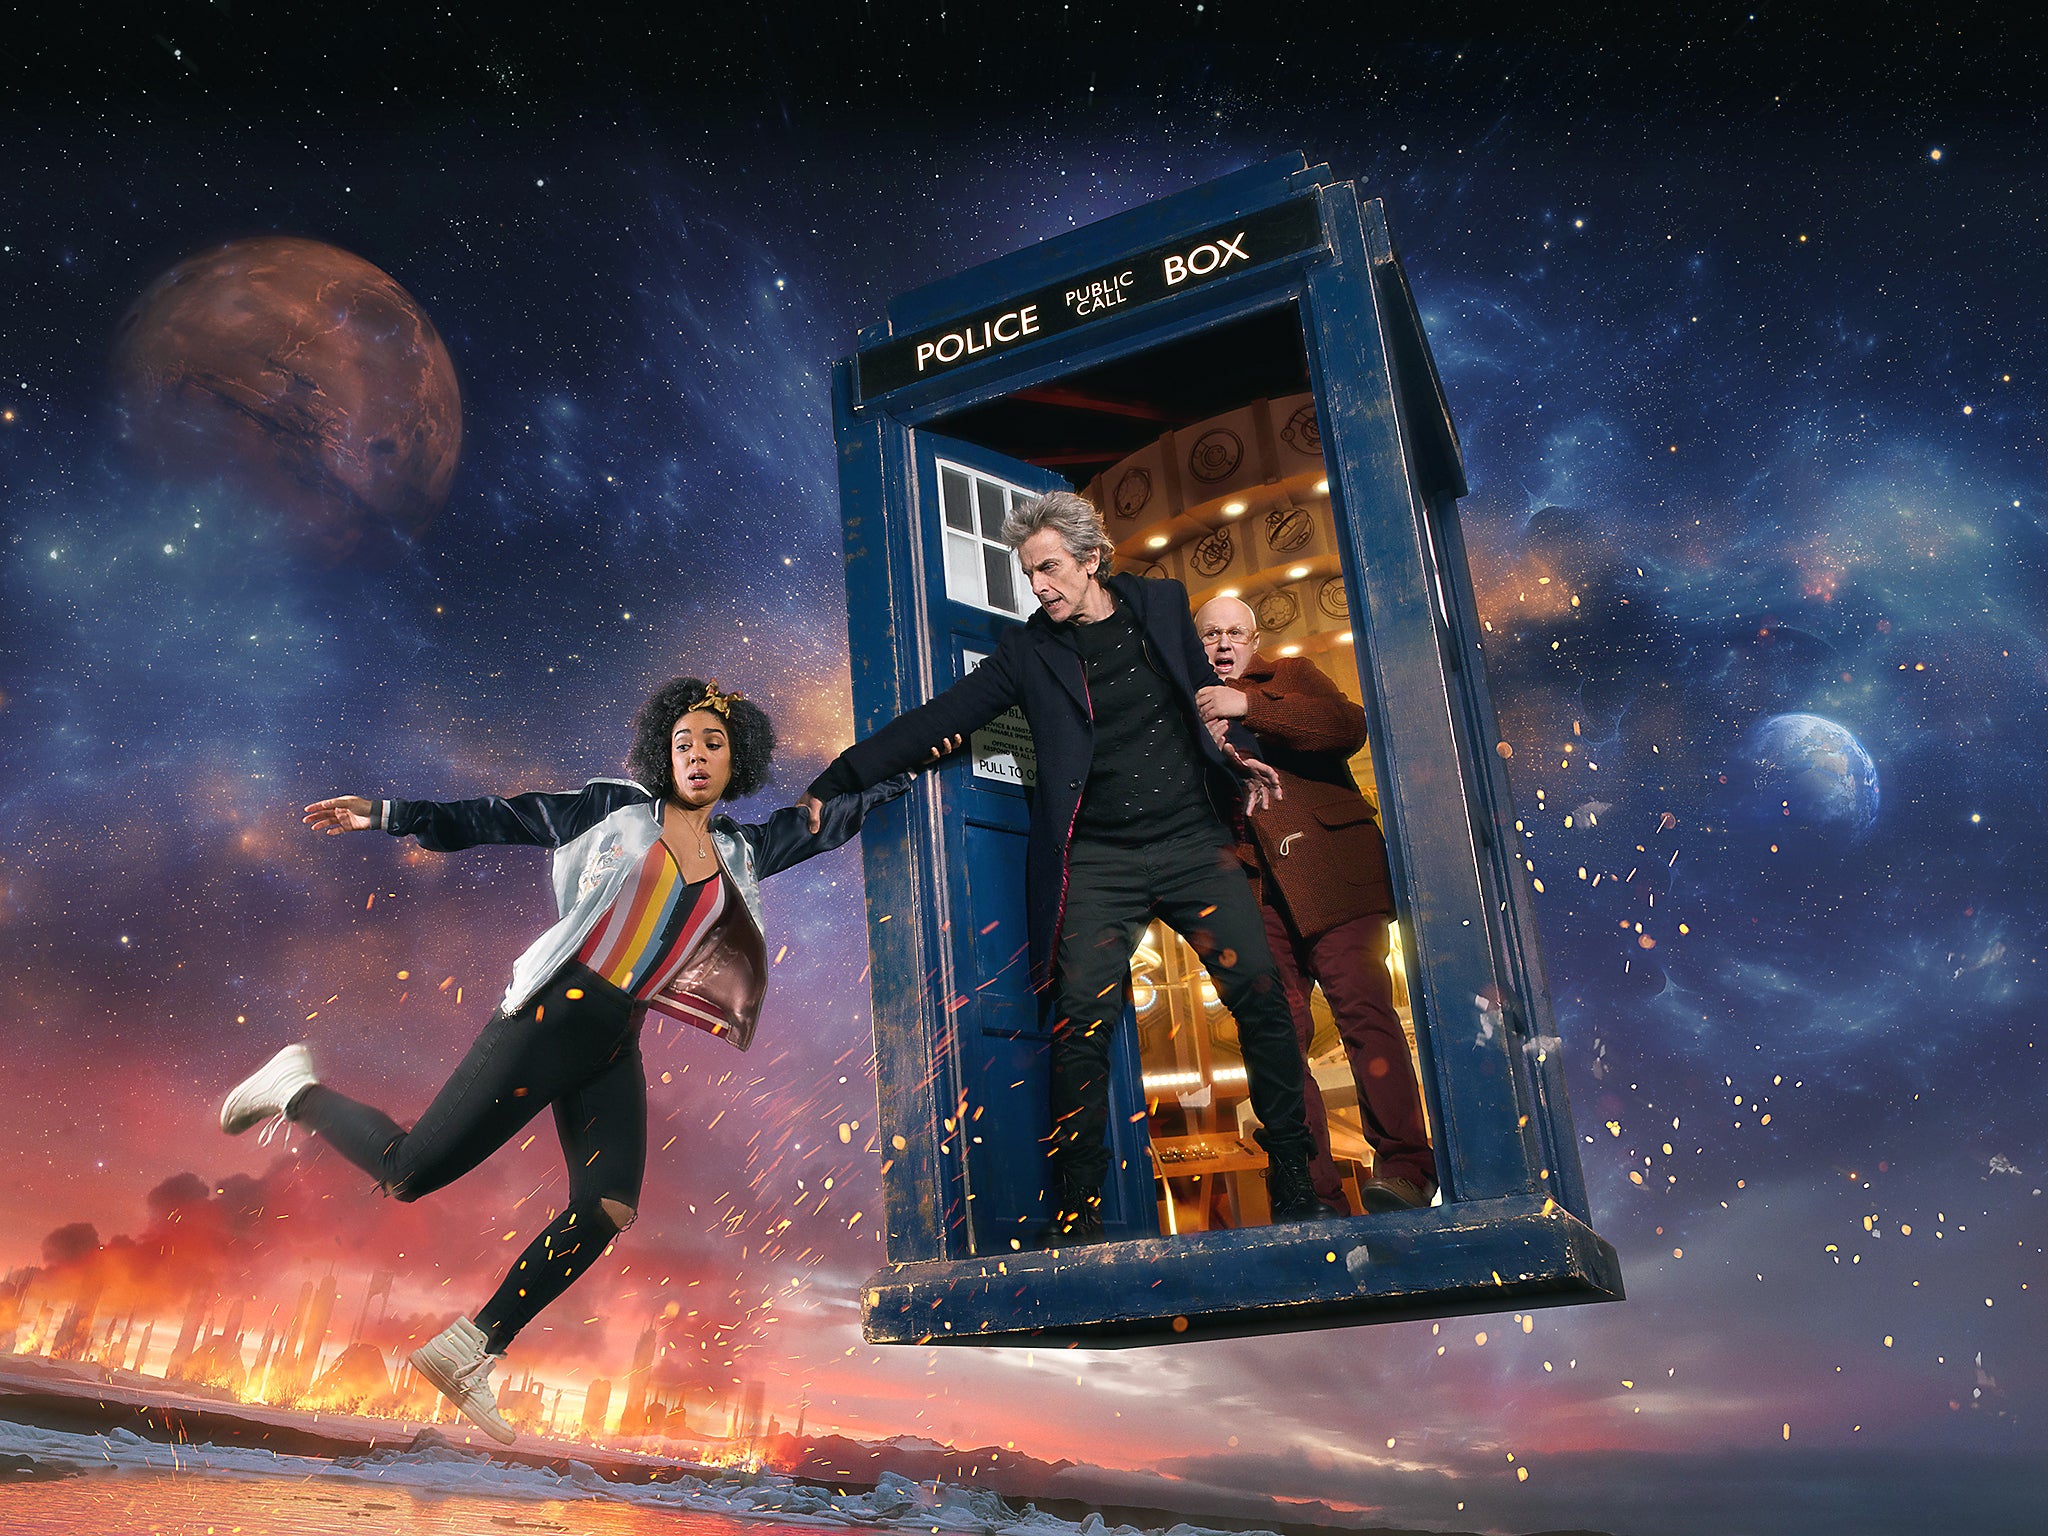 Tv Preview Doctor Who Bbc1 Saturday Capaldi S Last Spin But Images, Photos, Reviews